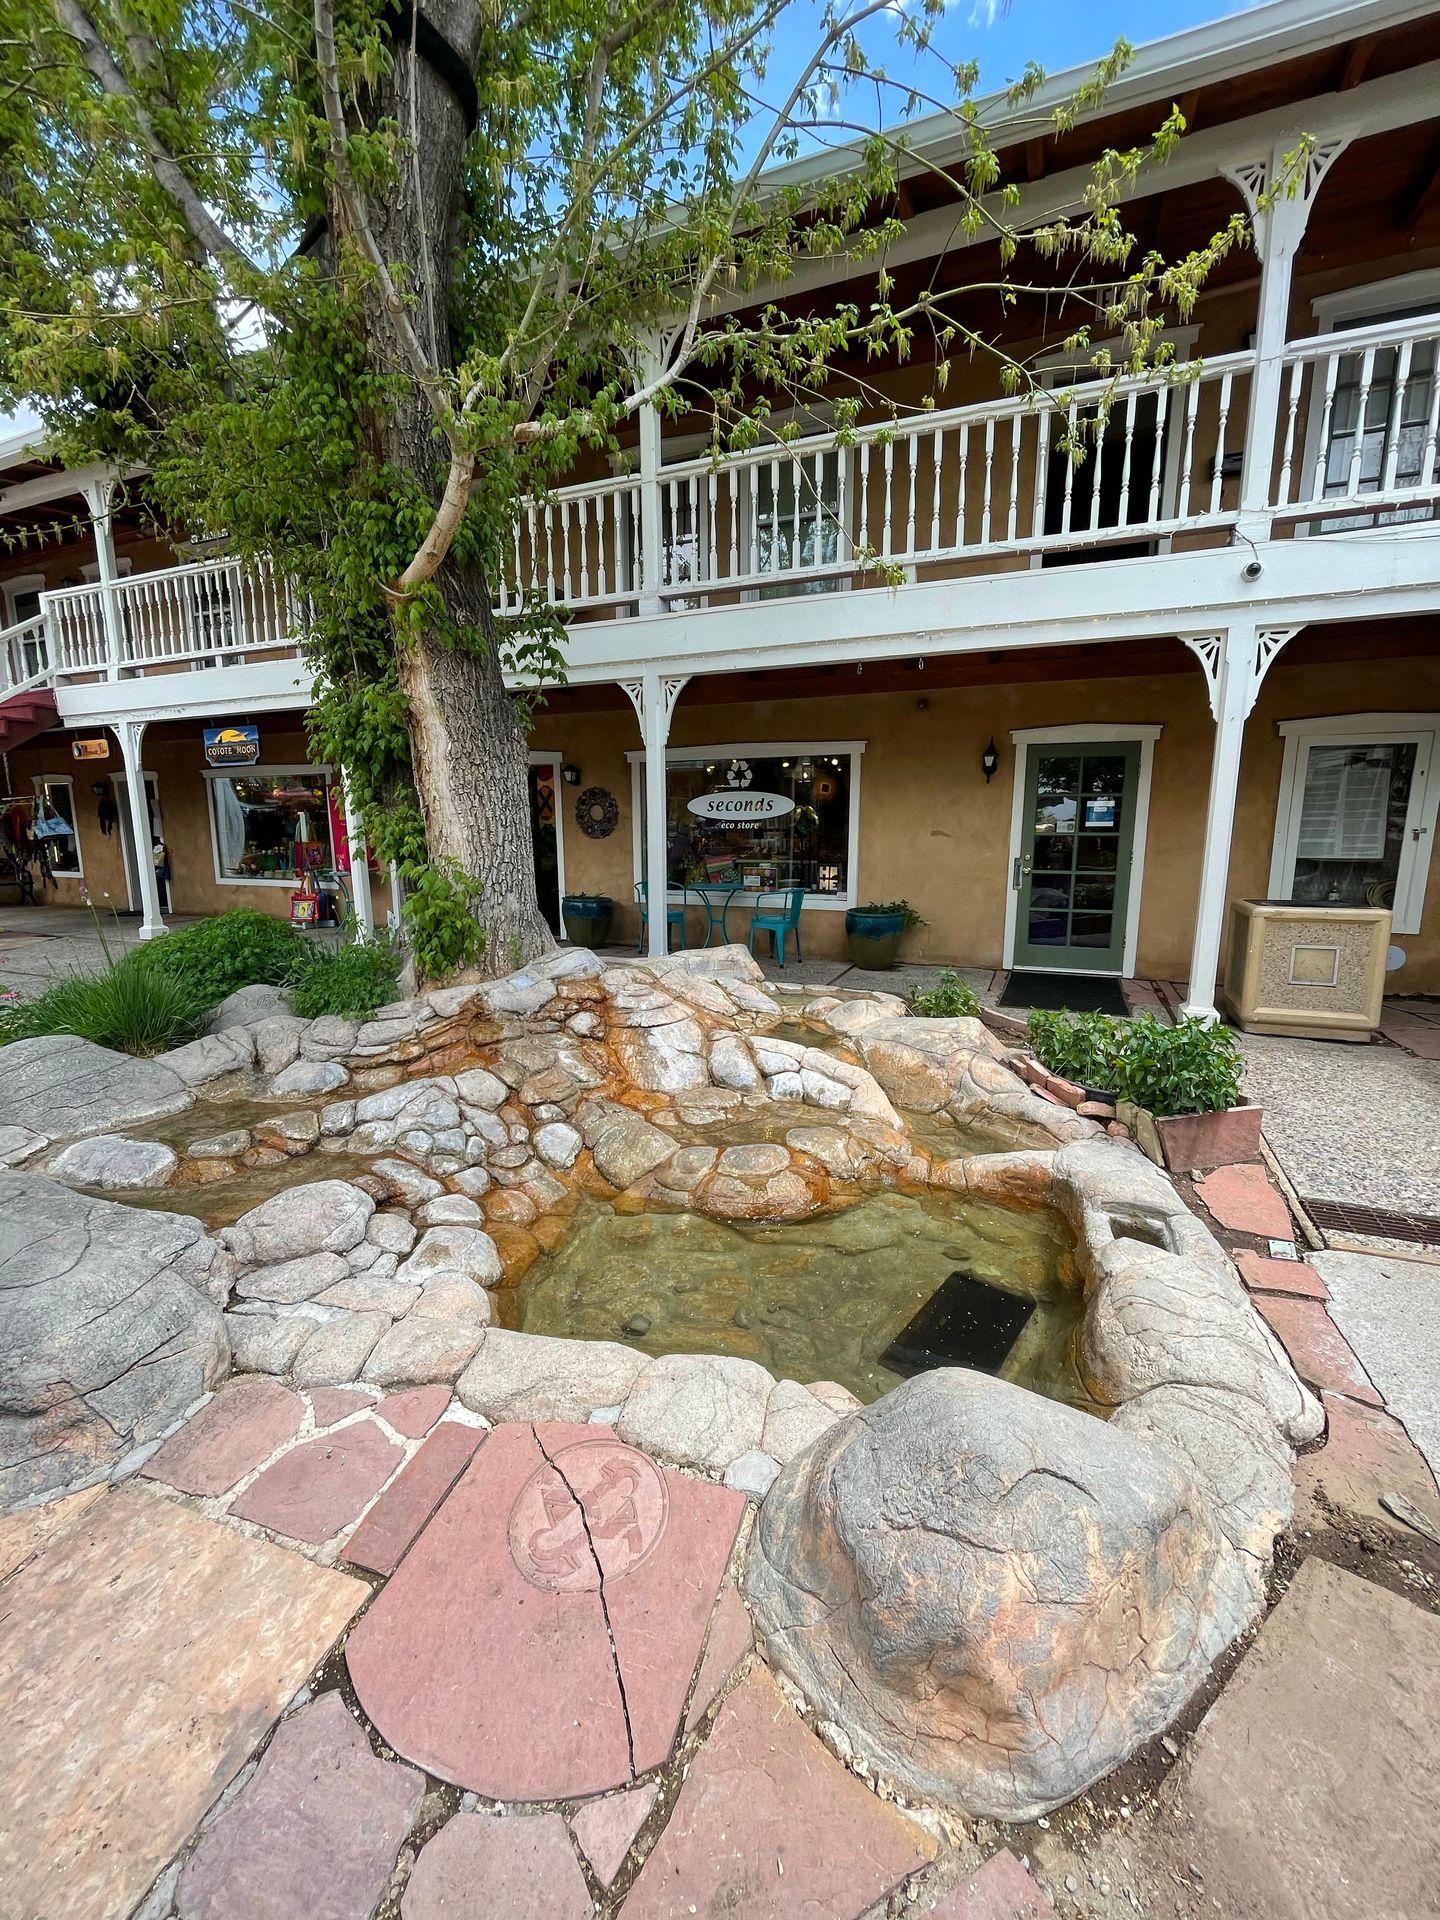 Two levels of businesses with some rock landscaping a small pond in front.